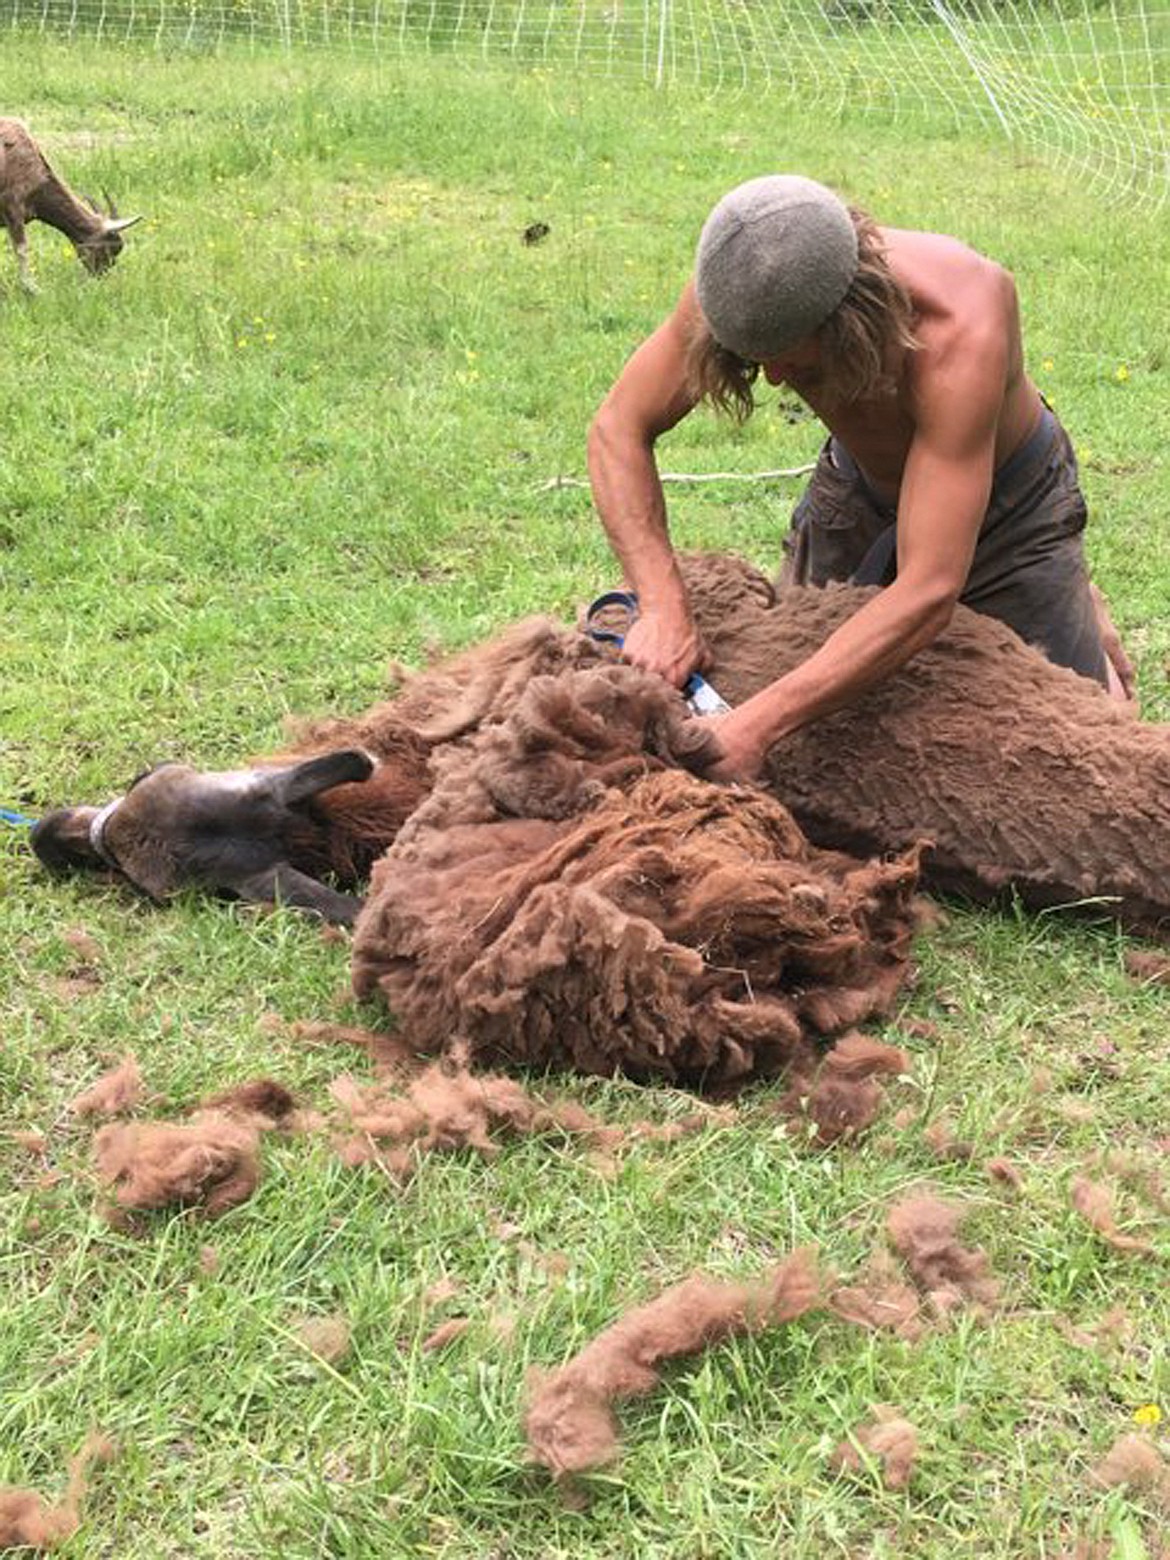 (Couresy photo) 
 Chris Wujek, shepherd, shears Rusty, a llama he recently captured from the wild, upon his arrival to Pine Street Woods. Kaniksu Land Trust has contracted with Wujek to rehabilitate meadows at the recreation site suffering from overgrazing by cattle.